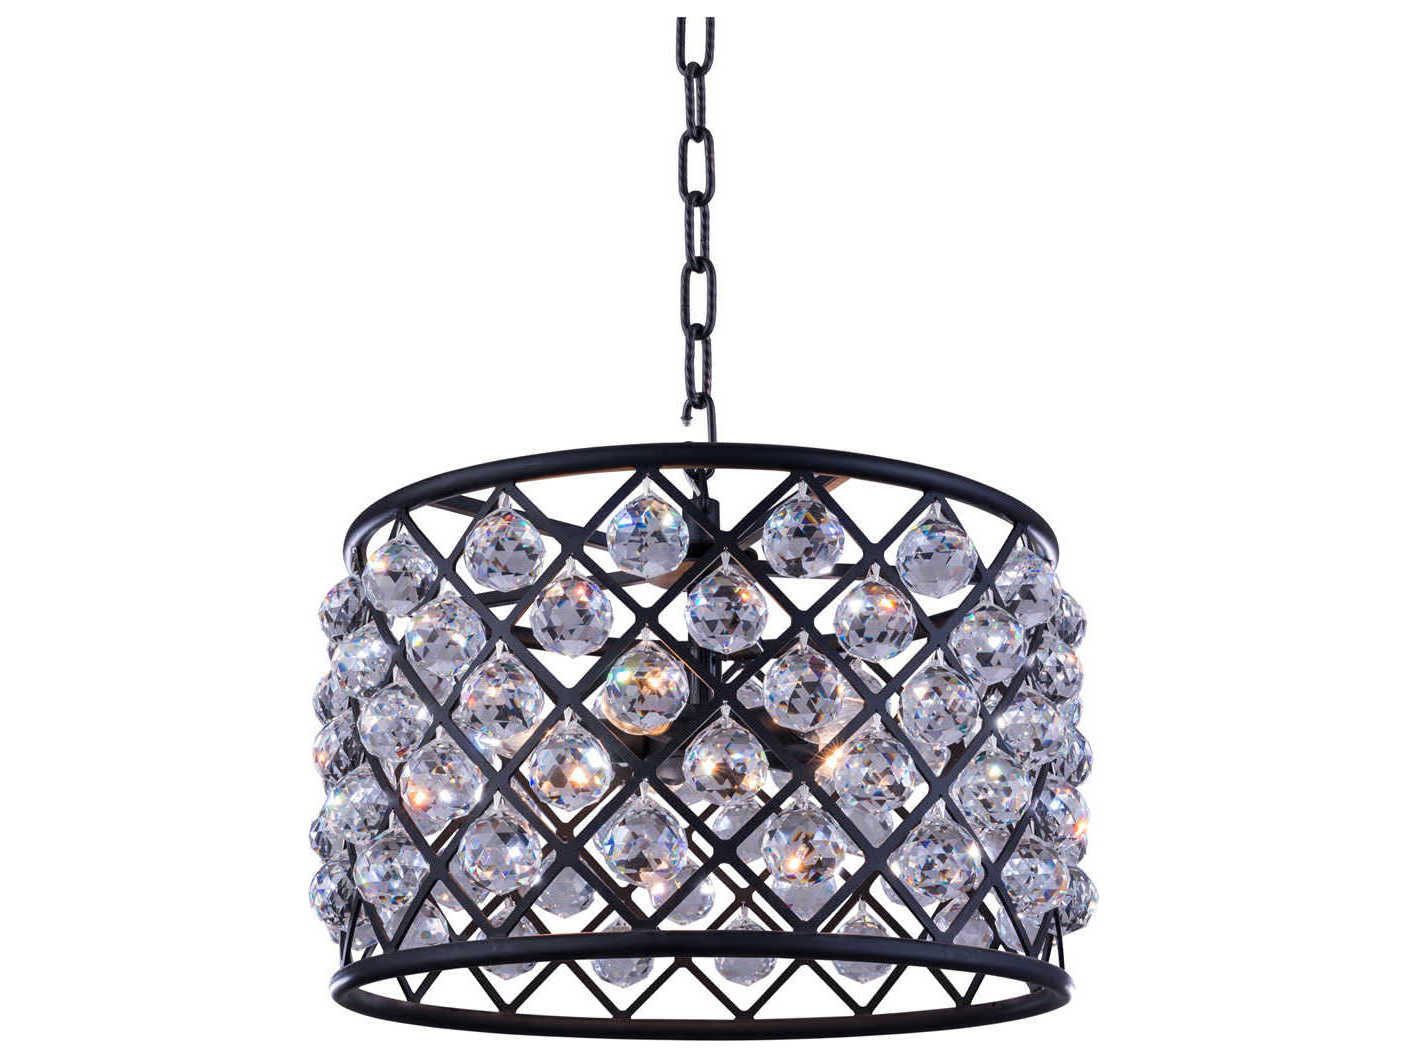 Светильники delight collection. Люстра Spencer Chandelier 3003 d50. Люстра Delight collection kr1209. Люстра Spencer Chandelier 3003–100. Подвесная люстра Delight collection Crystal Black.